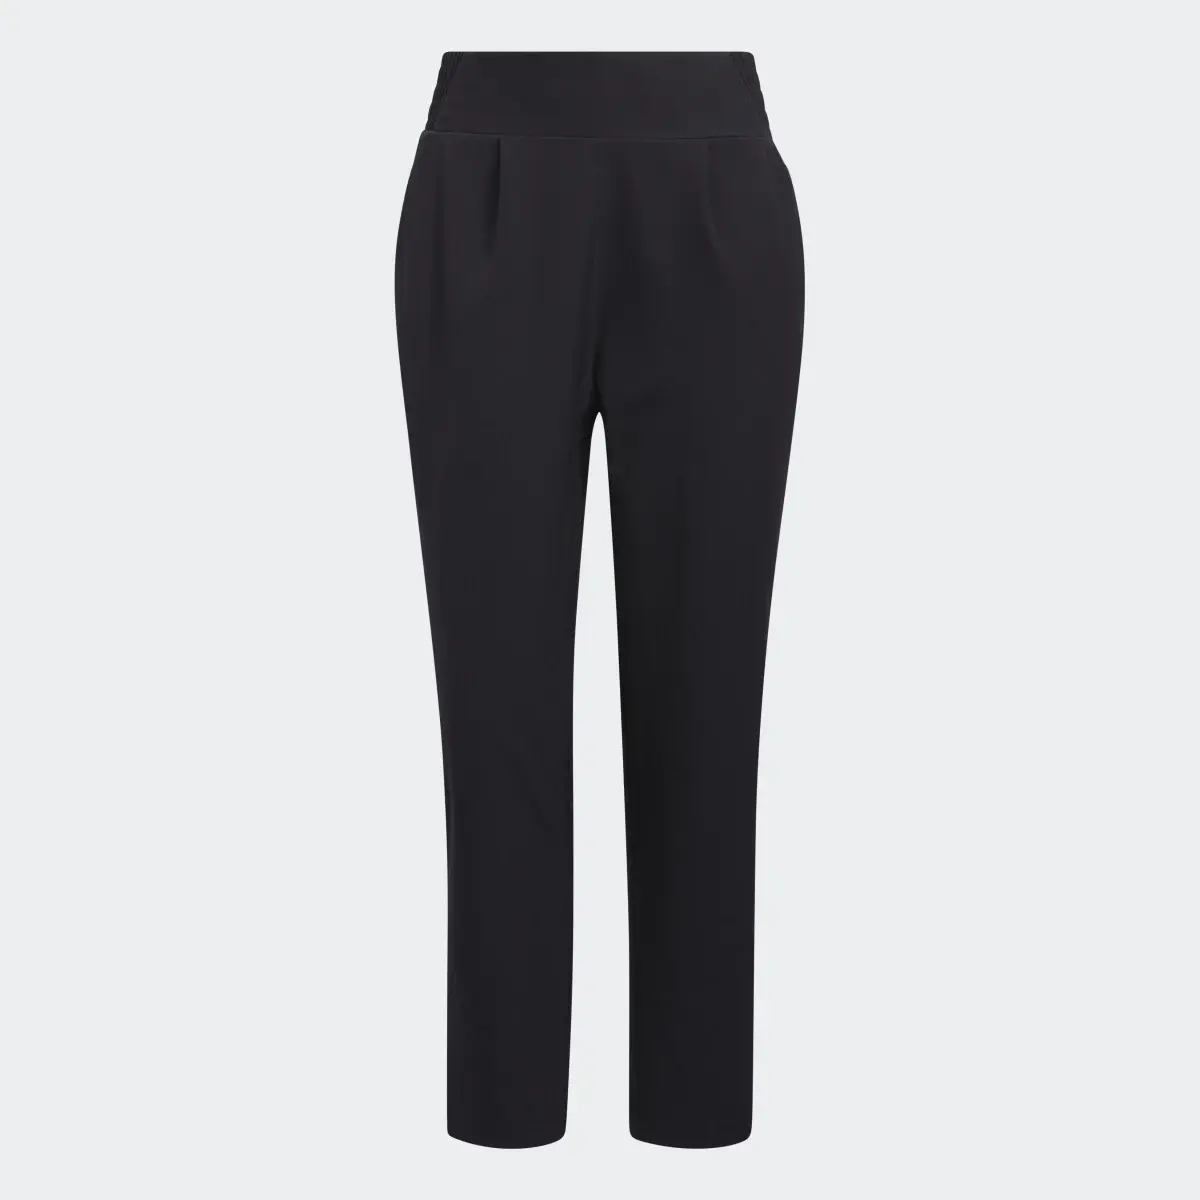 Adidas Go-To Pleated Golf Pants. 1